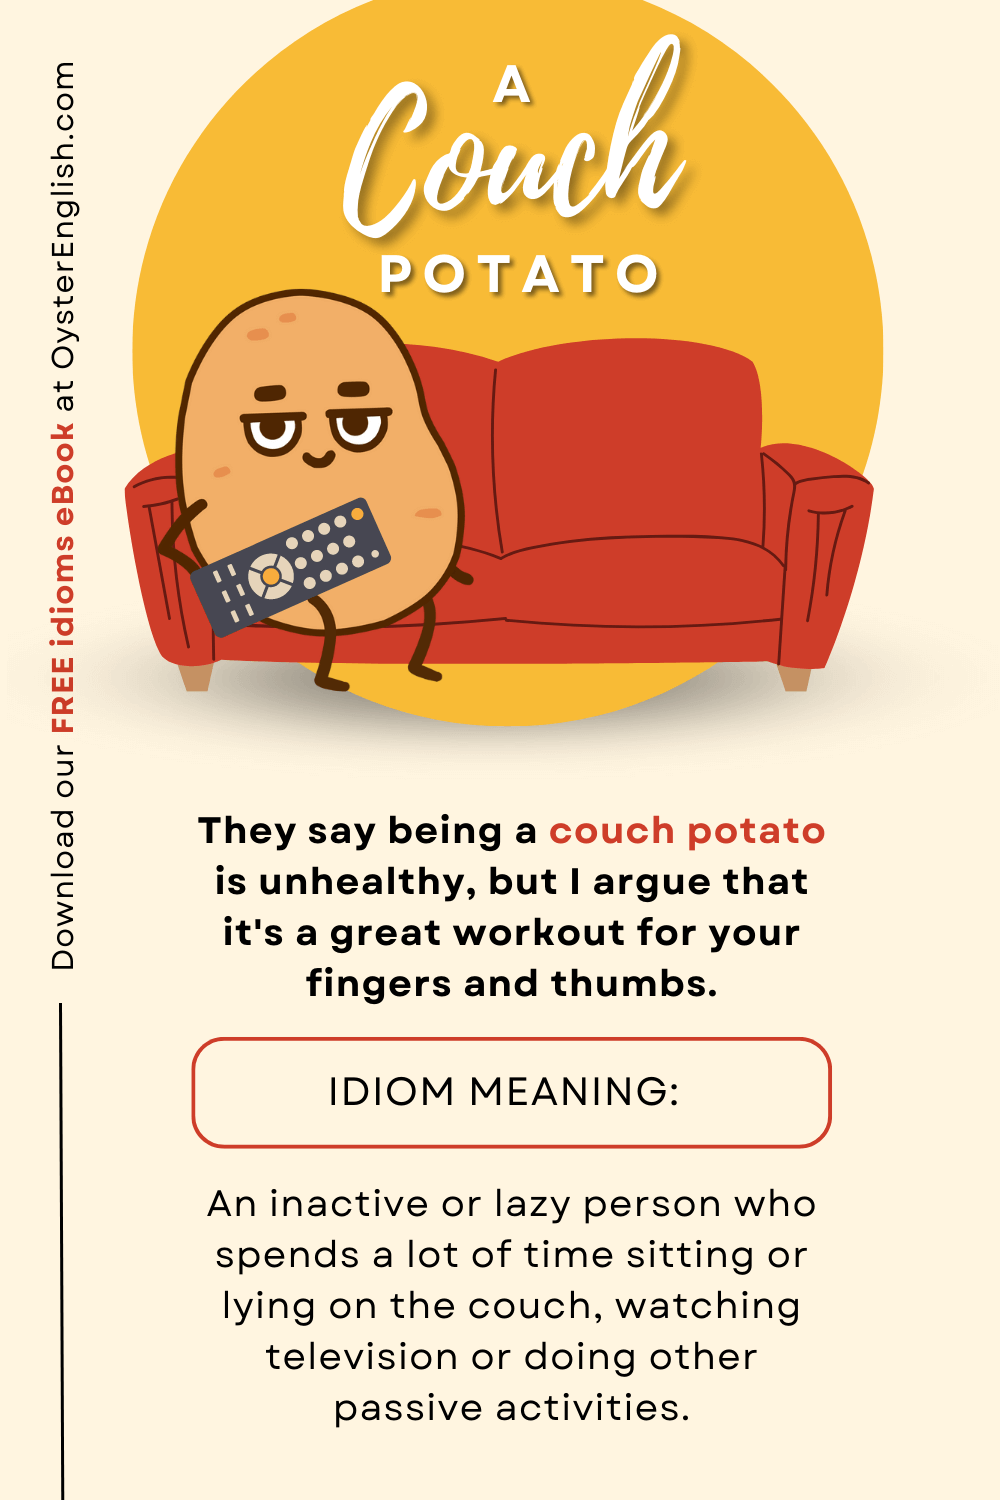 A couch potato idiom: A cartoon potato holding a tv remote control sits on a couch. "They say being a couch potato is unhealthy, but I argue that it's a great workout for your fingers and thumbs."